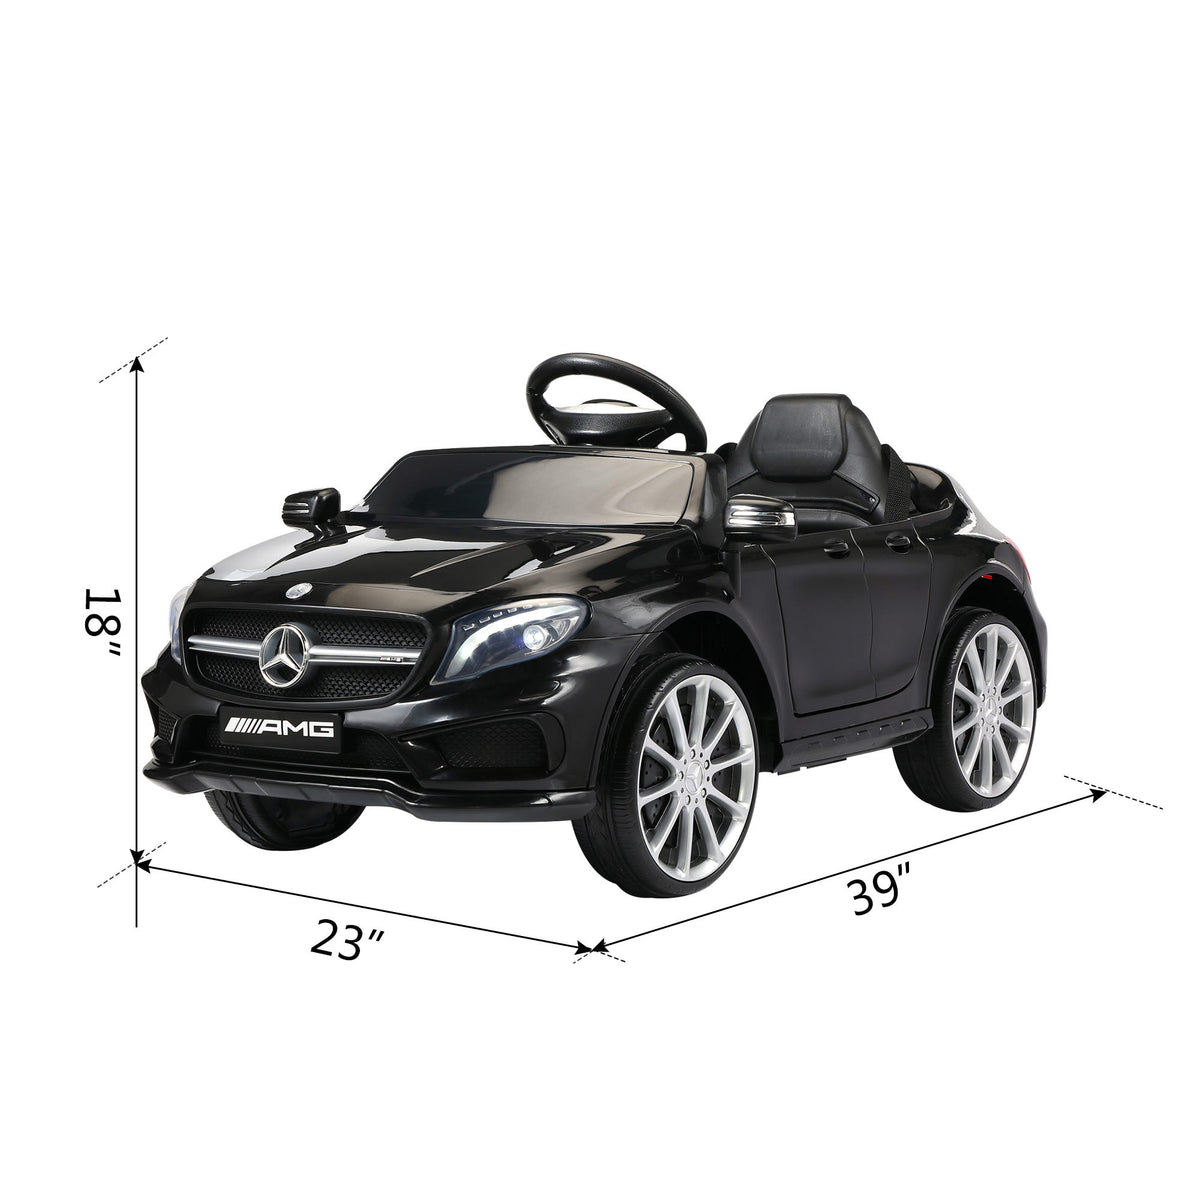 6V Kid Ride on Car Electric Vehicle with Parental Remote Control, MP3 Player, Headlights (Black)